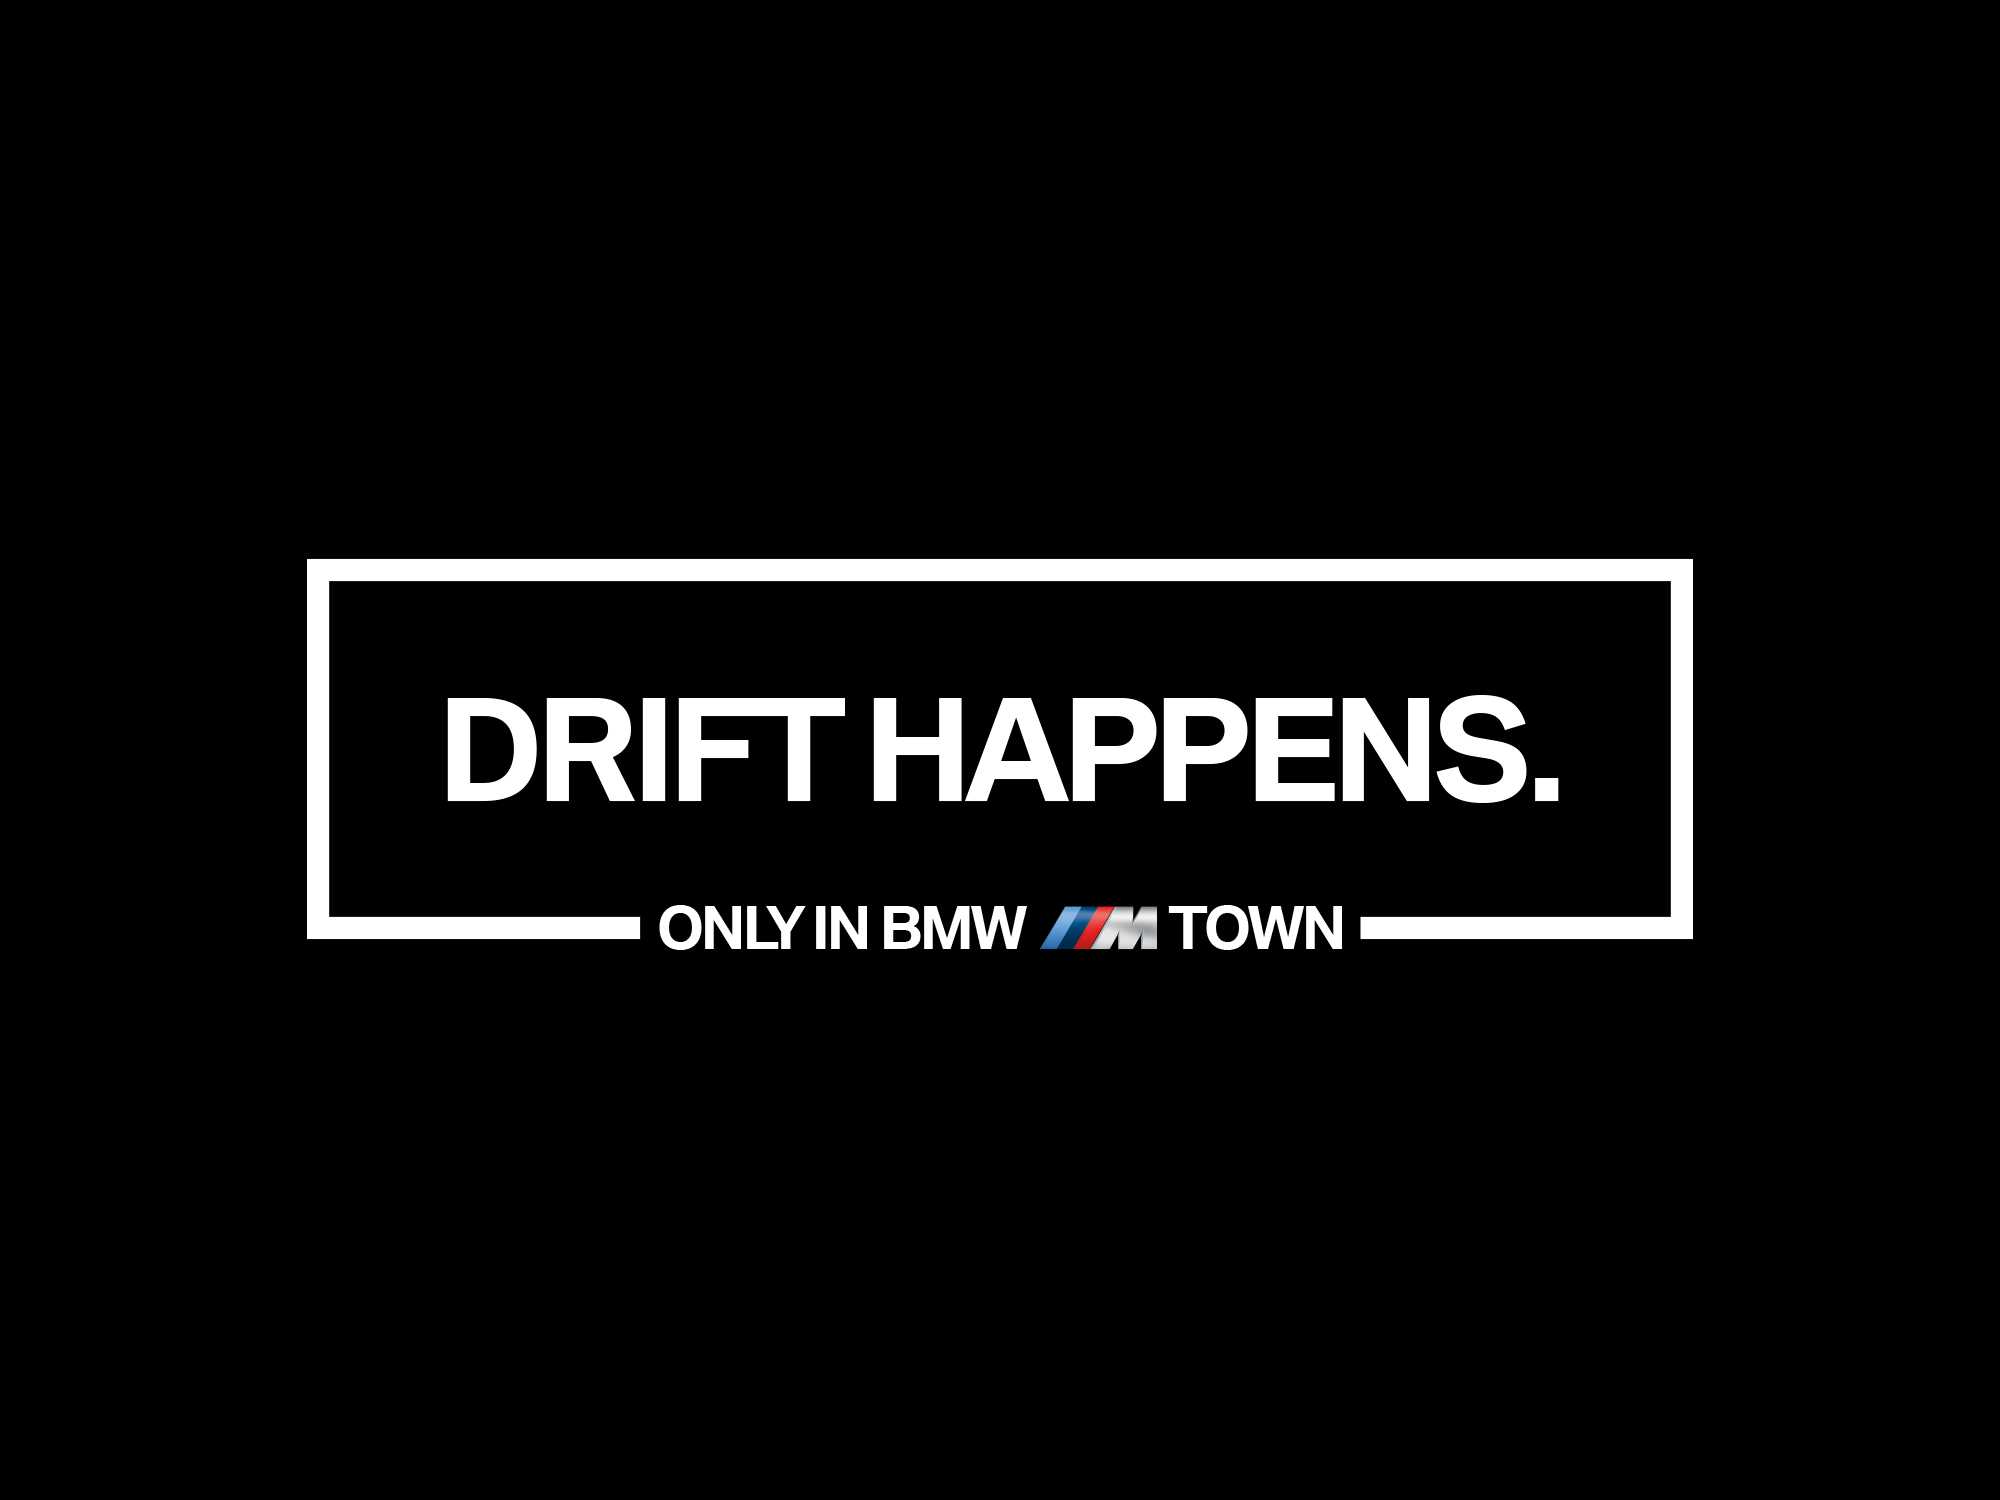 "Only in M Town" - New digital campaign for BMW M. (09/2018)